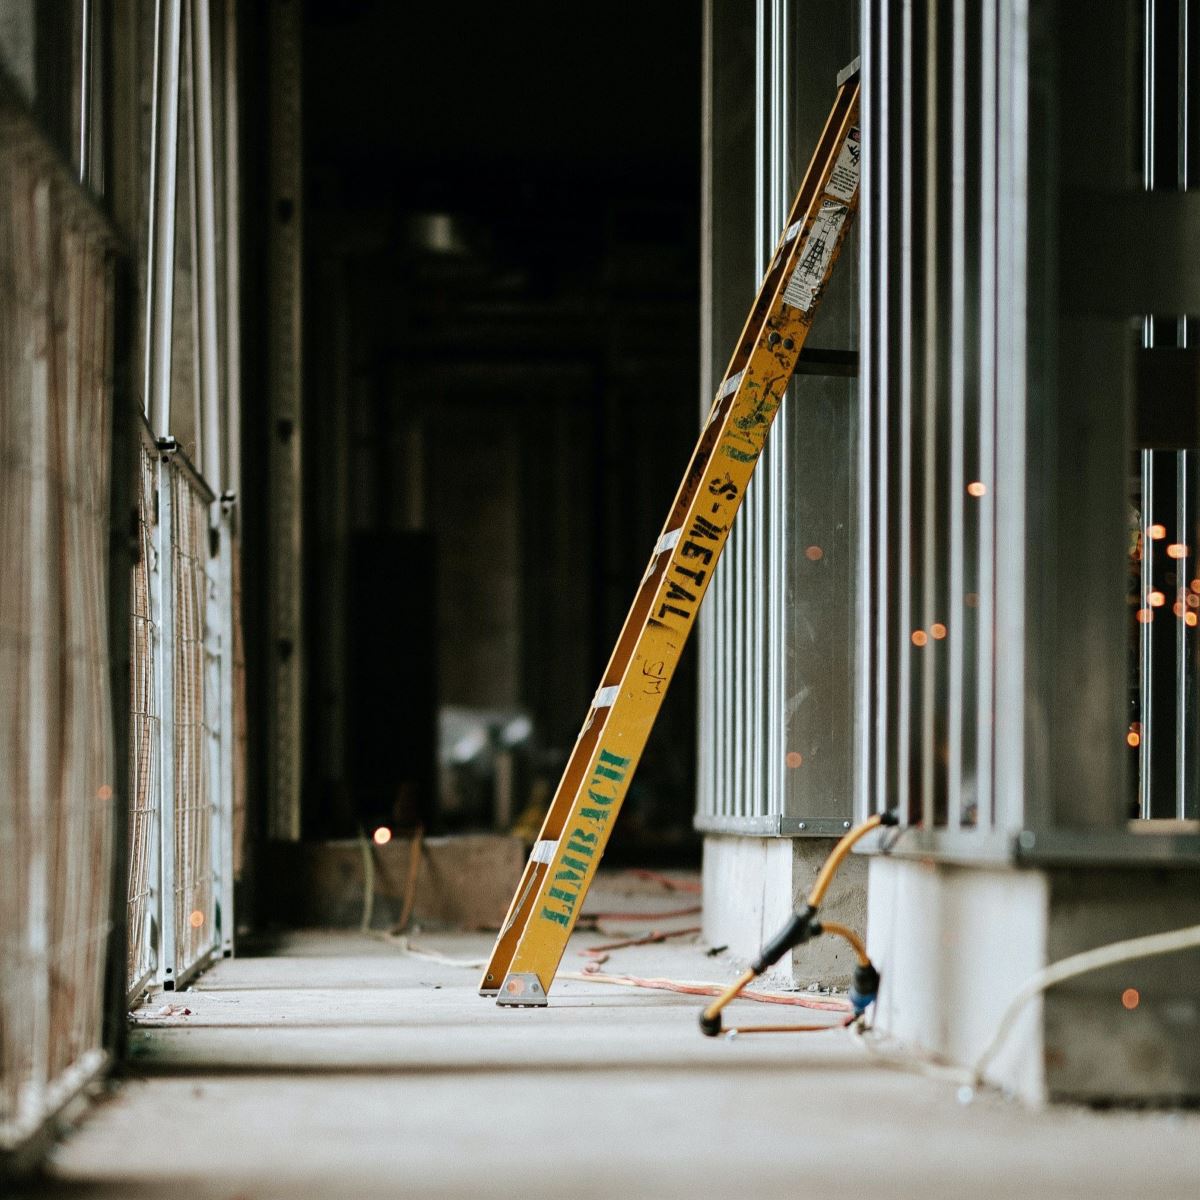 What Is A General Safety Guideline For Ladder Use?